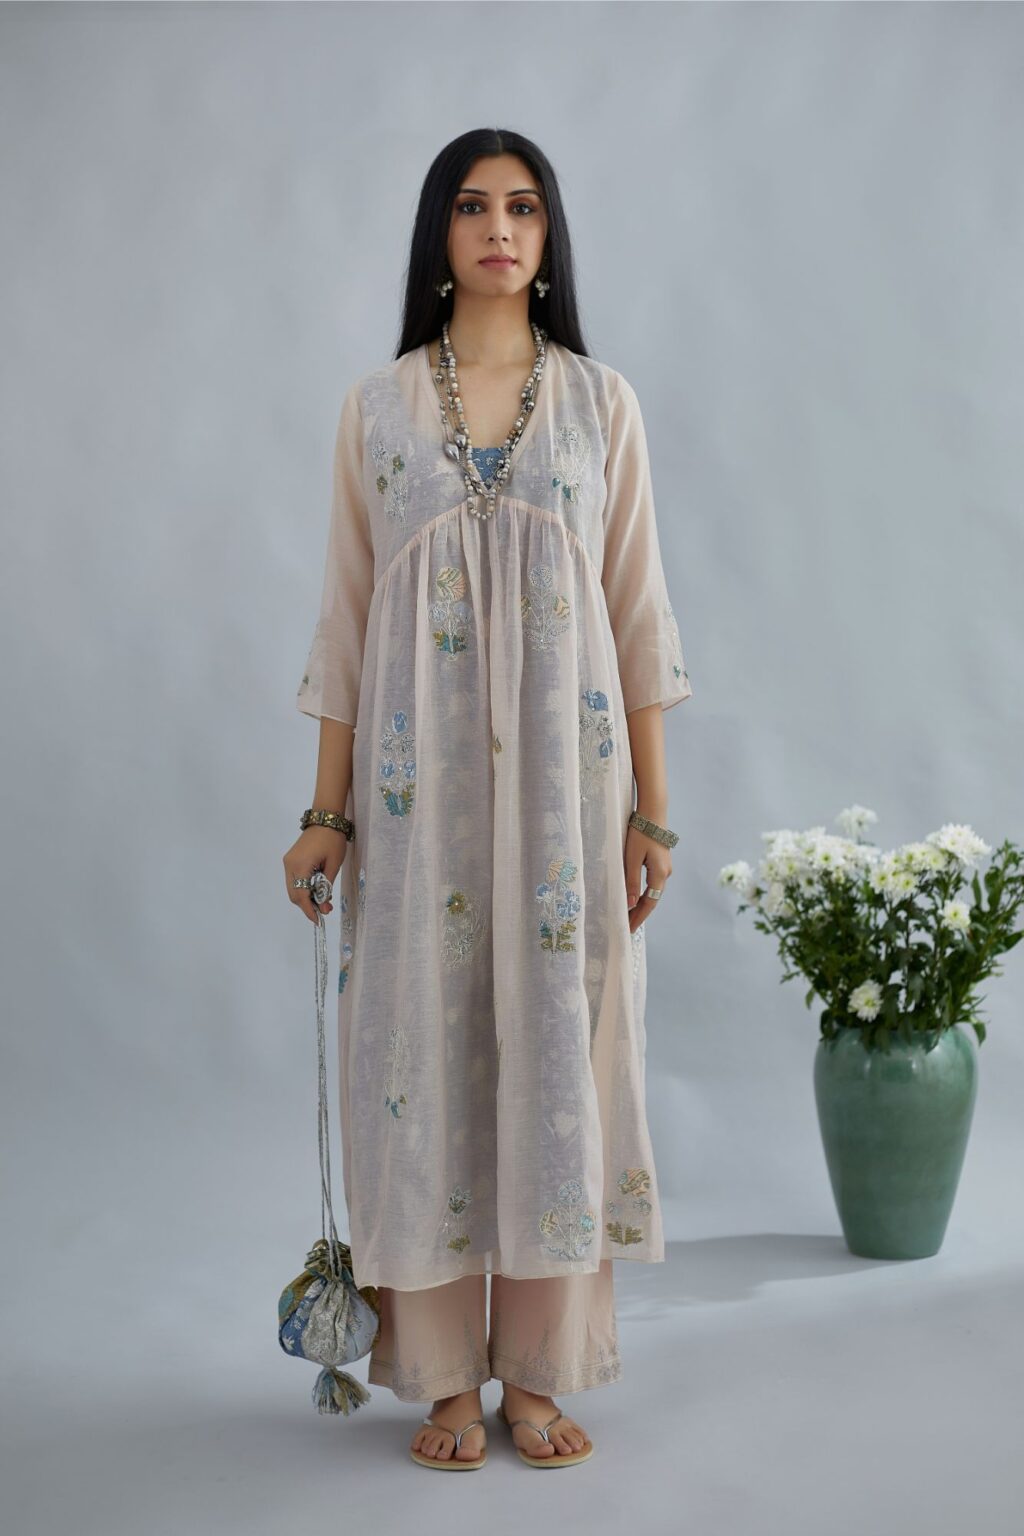 Cotton Chanderi kurta set with all-over assorted print floral applique, highlighted with sequin and silver zari embroidery.